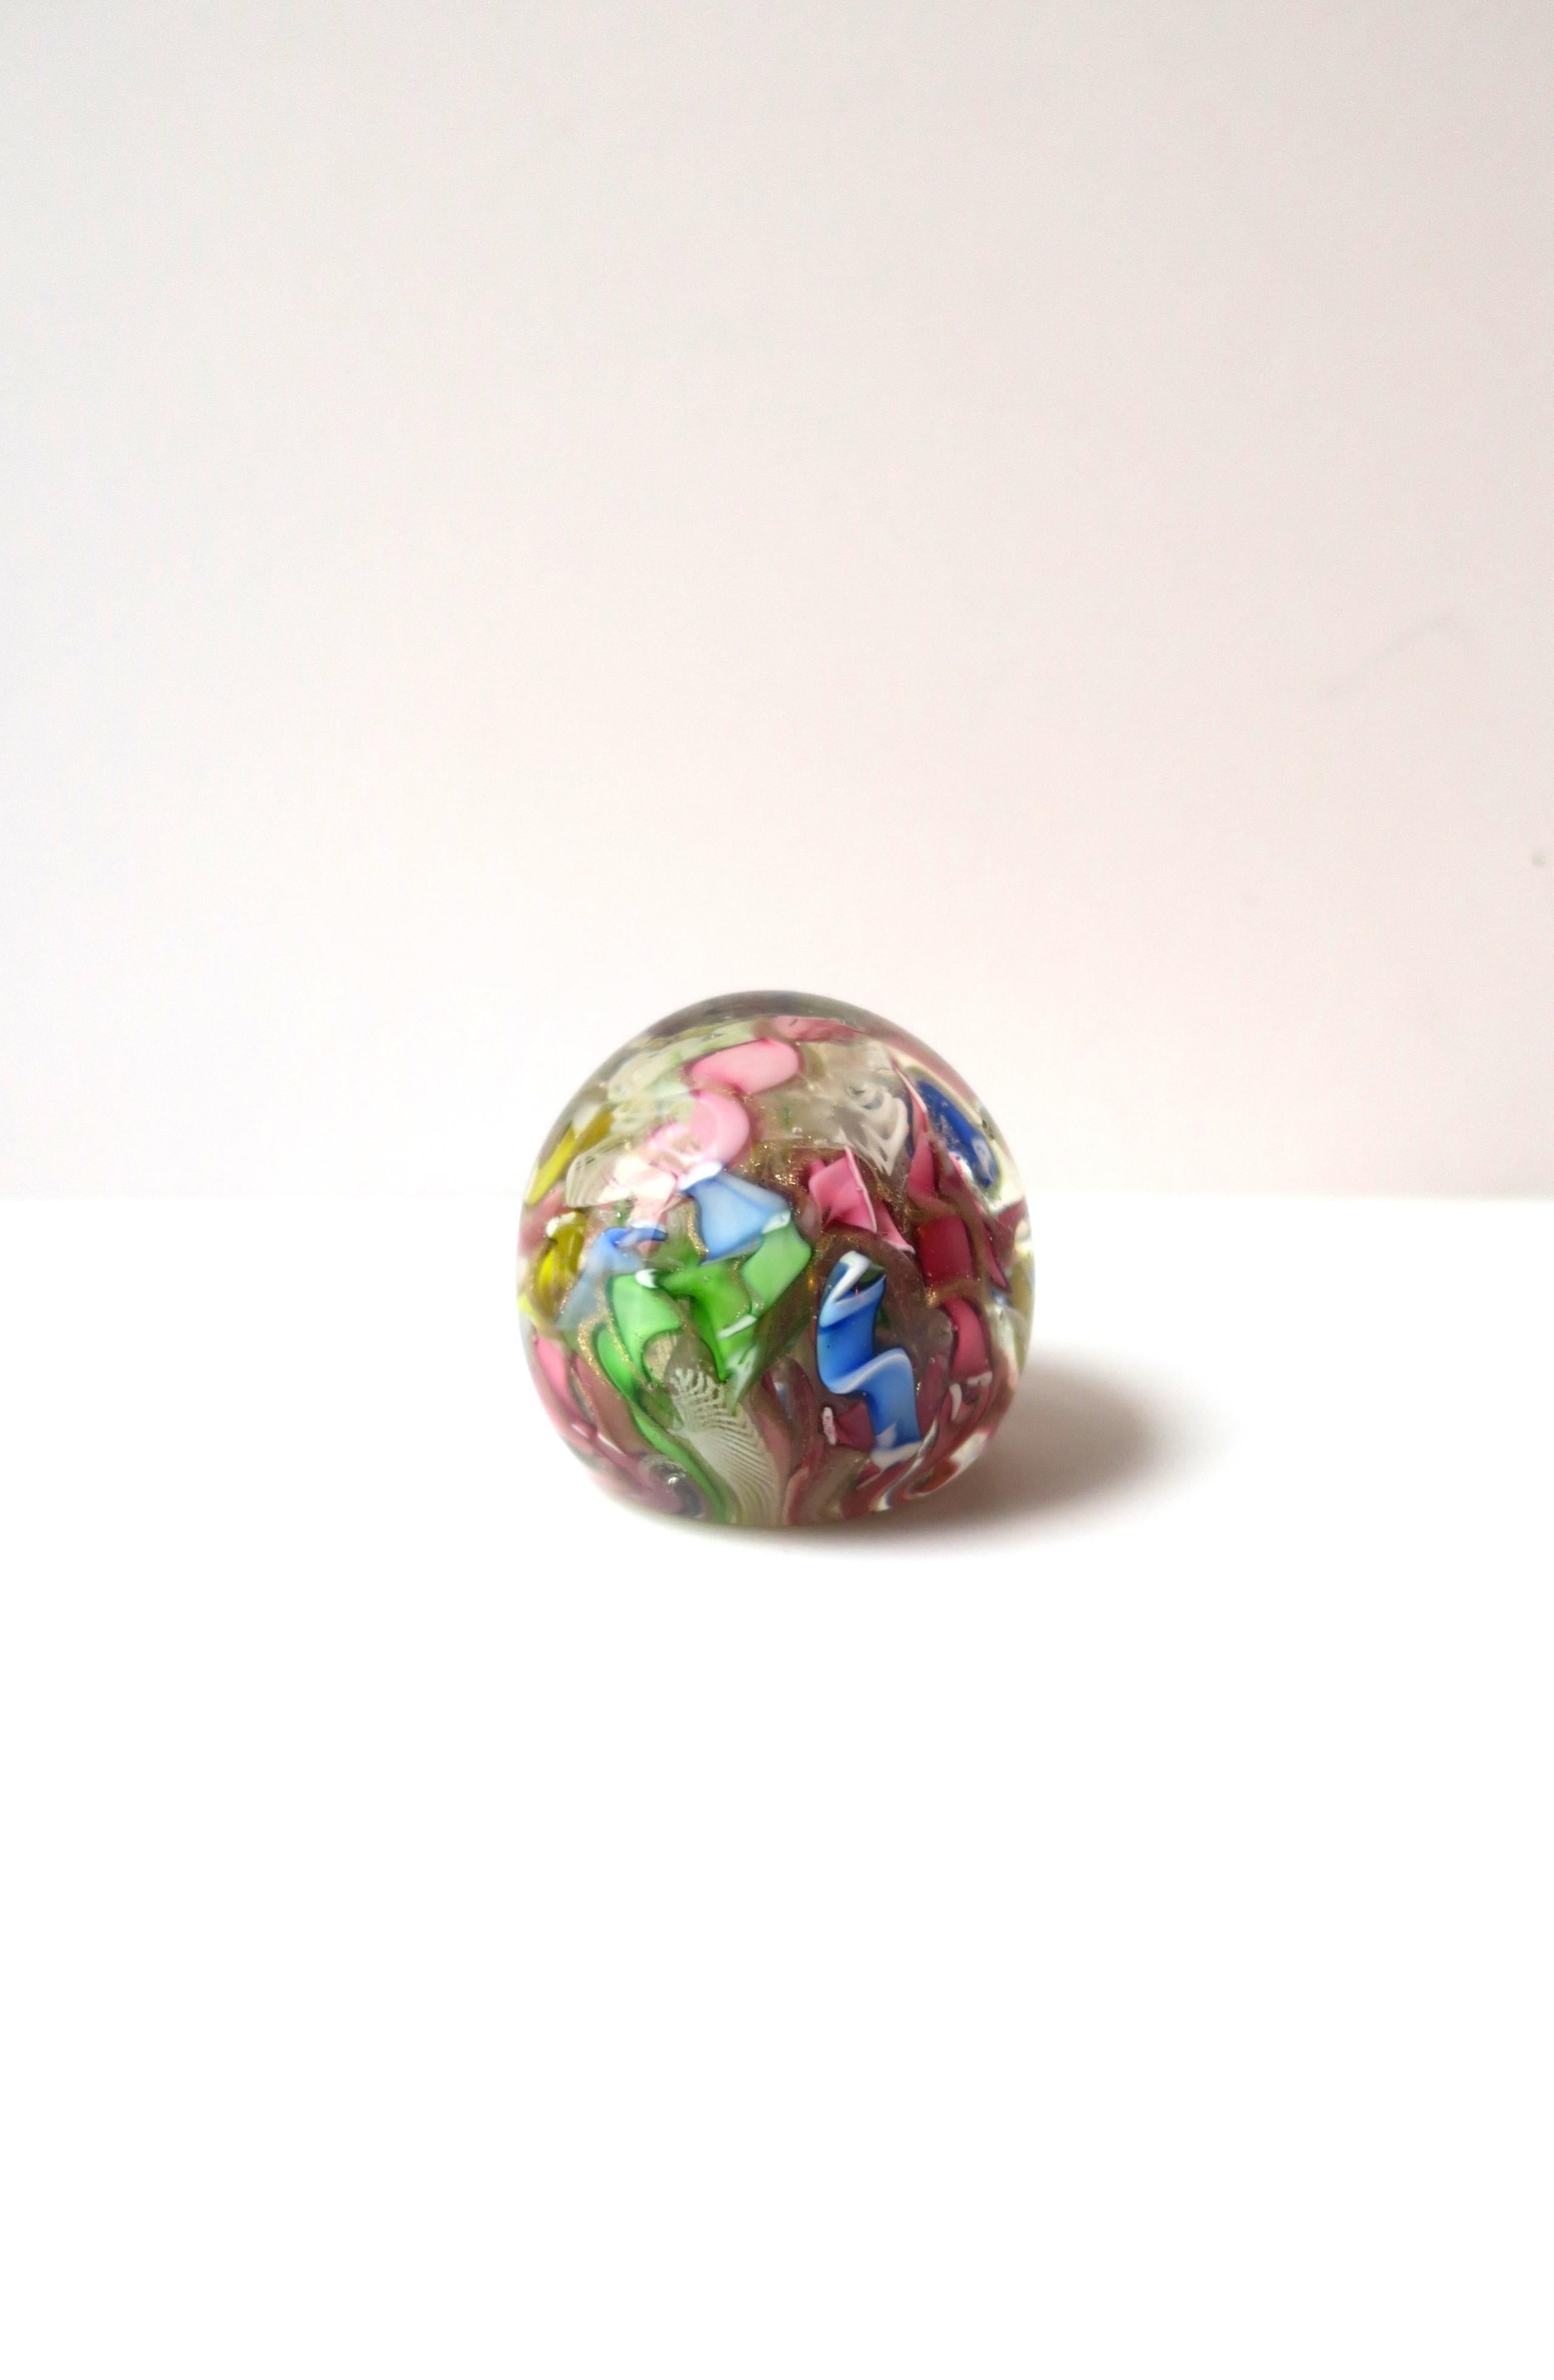 A beautiful vintage Italian Murano hand blown art glass paperweight, Midcentury Modern period, circa mid-20th century, Italy. Colors include pink, green, blue and white Zanfirico ribbon design. Piece maintains original label as shown in last two